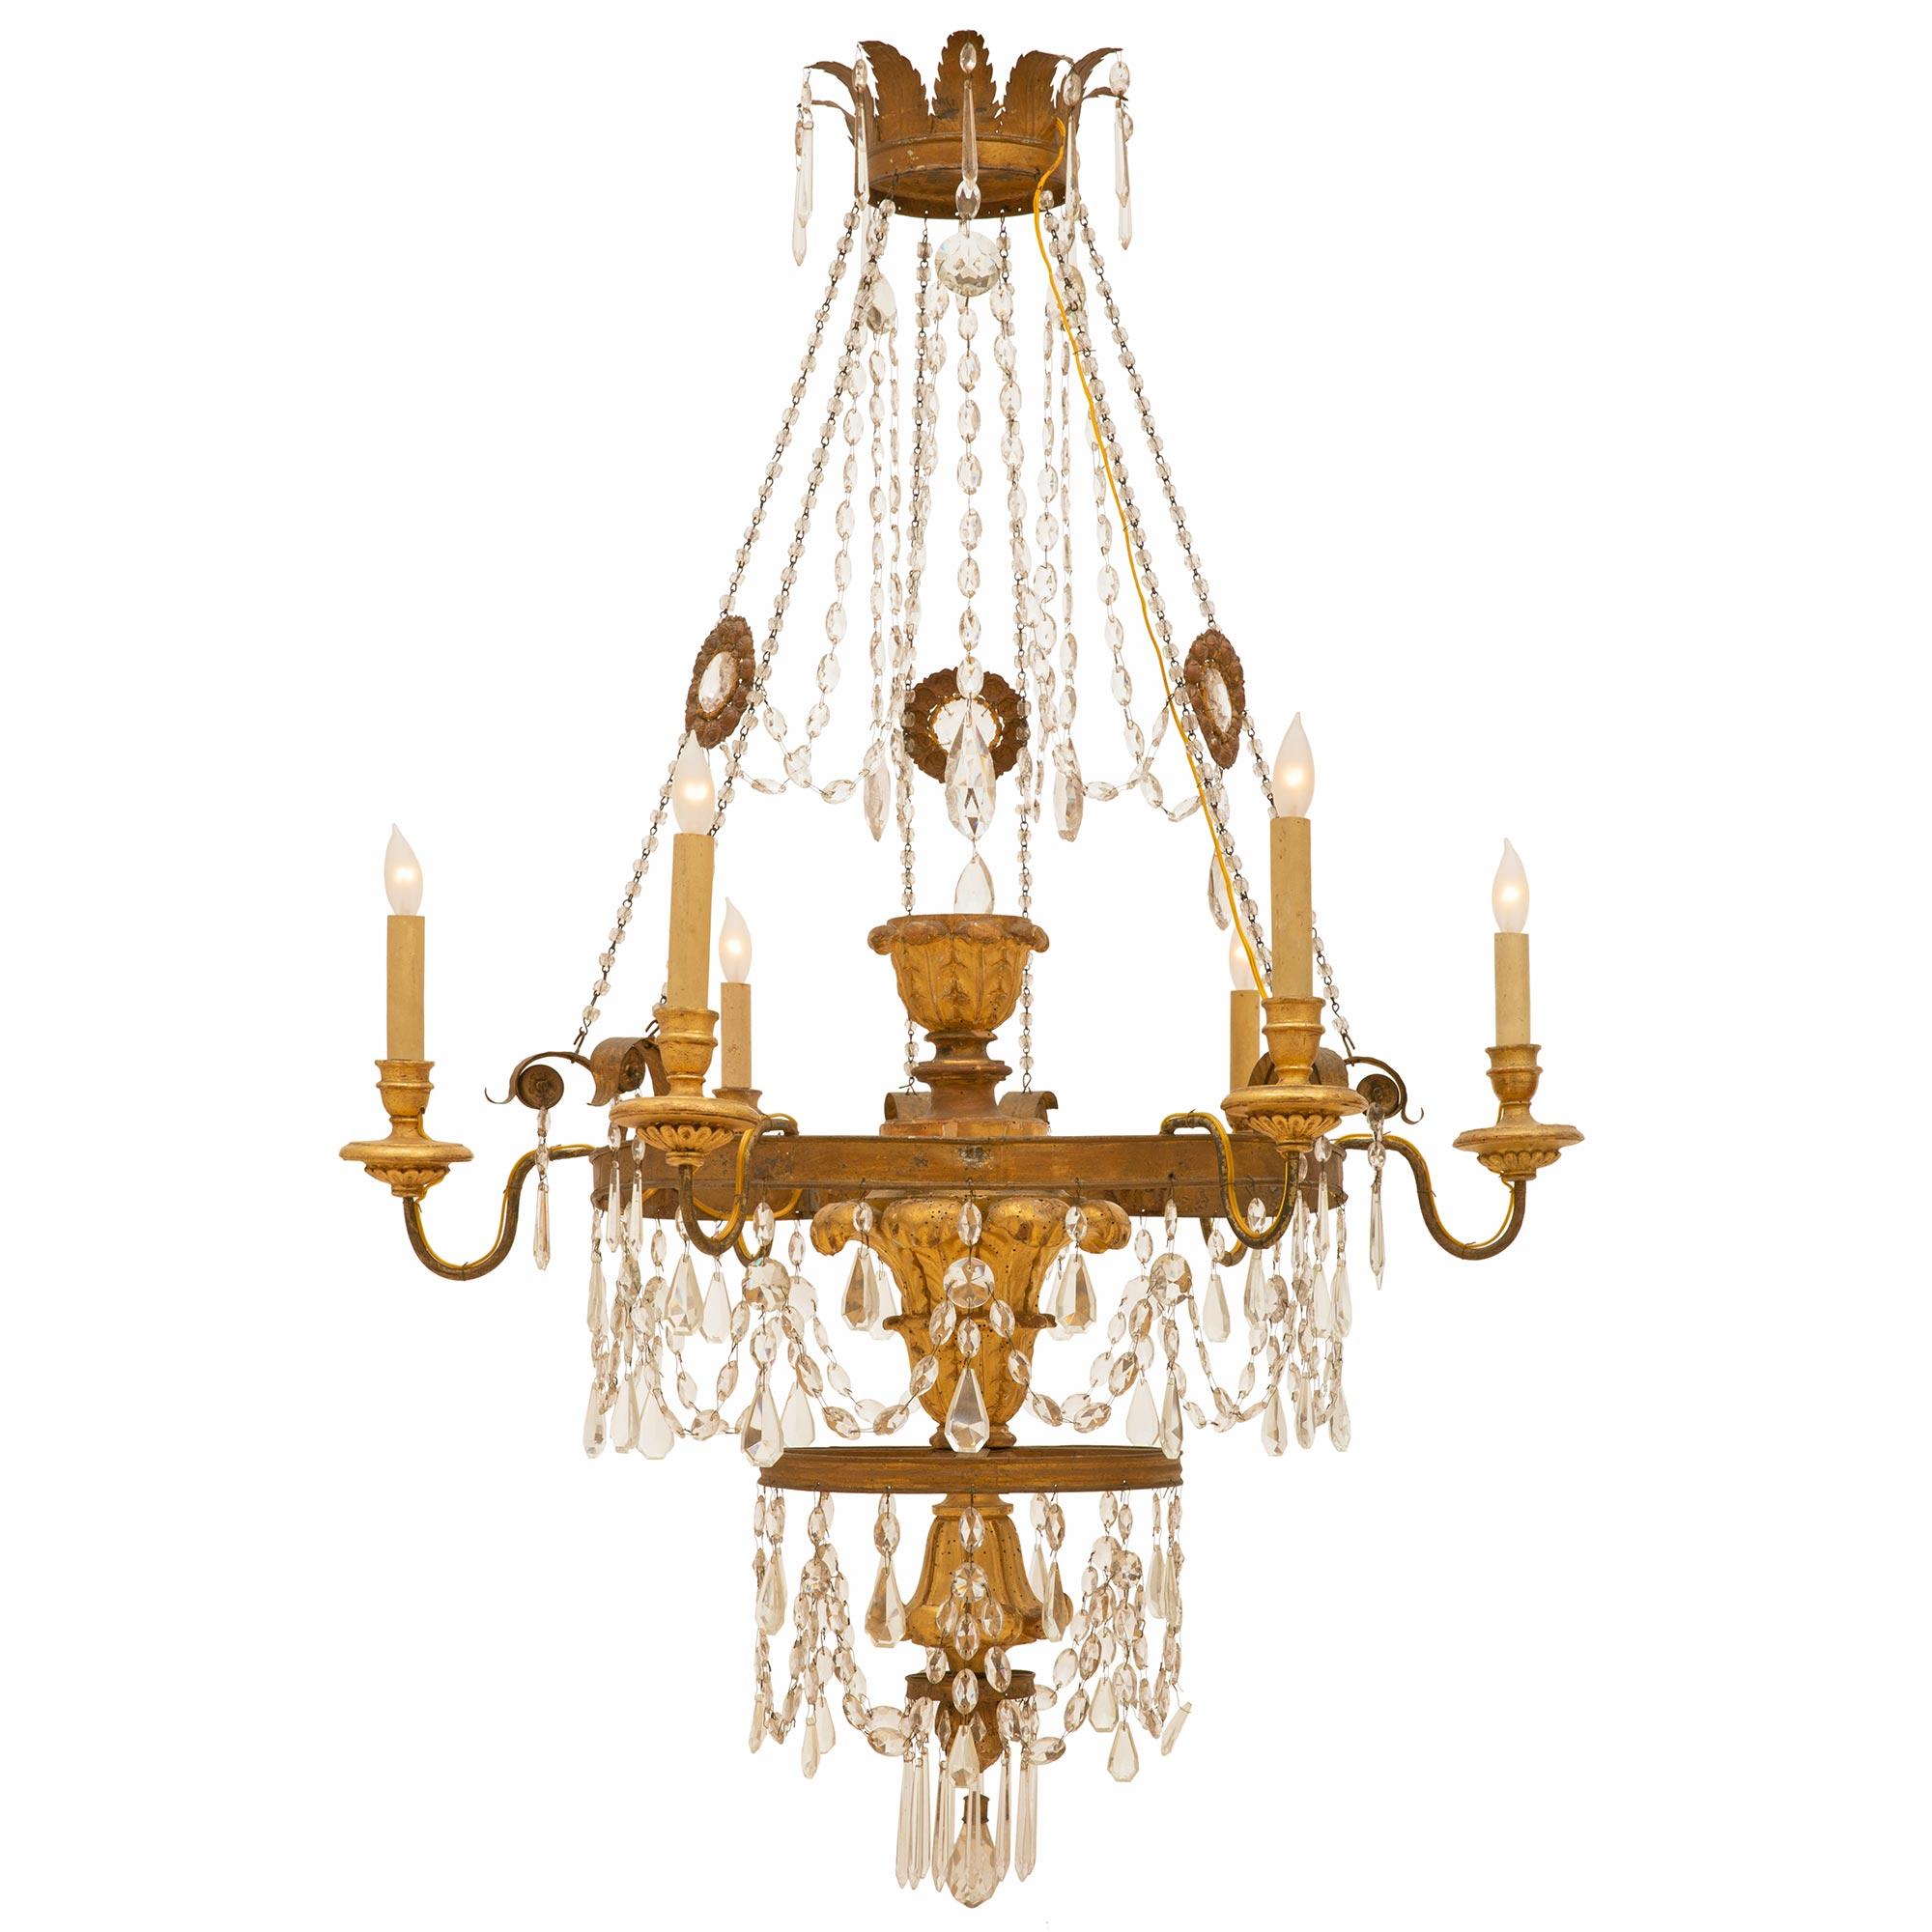 Italian 19th Century Giltwood and Crystal Chandelier In Good Condition For Sale In West Palm Beach, FL